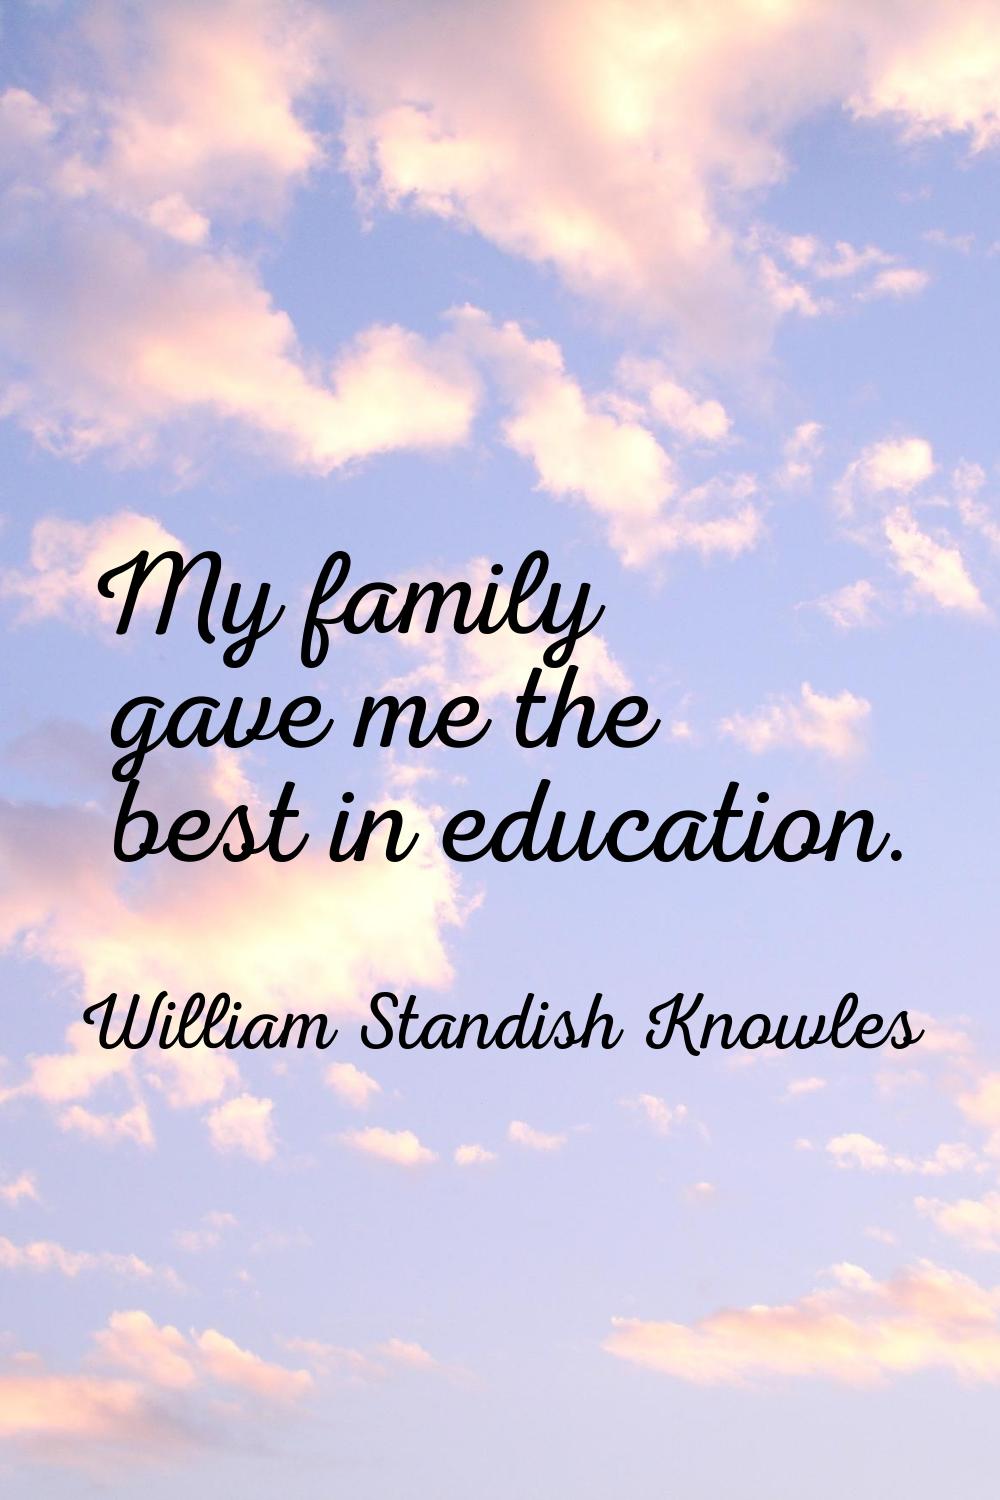 My family gave me the best in education.